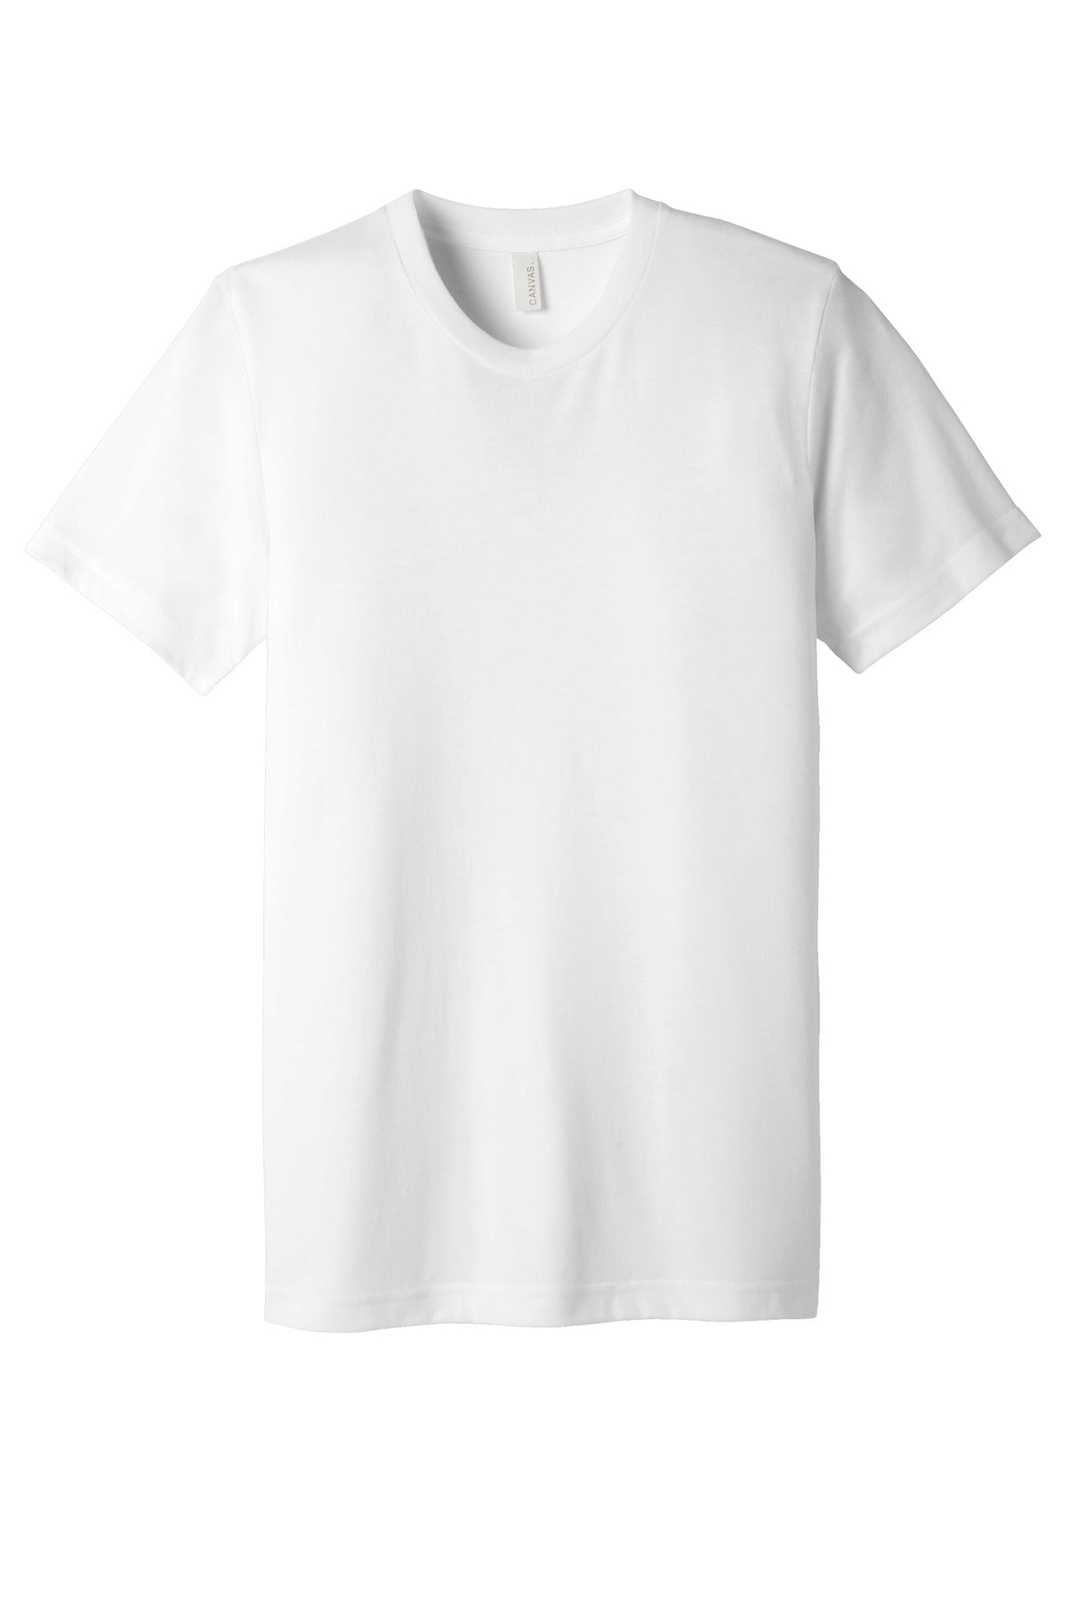 Bella + Canvas 3413 Unisex Triblend Short Sleeve Tee - Solid White Triblend - HIT a Double